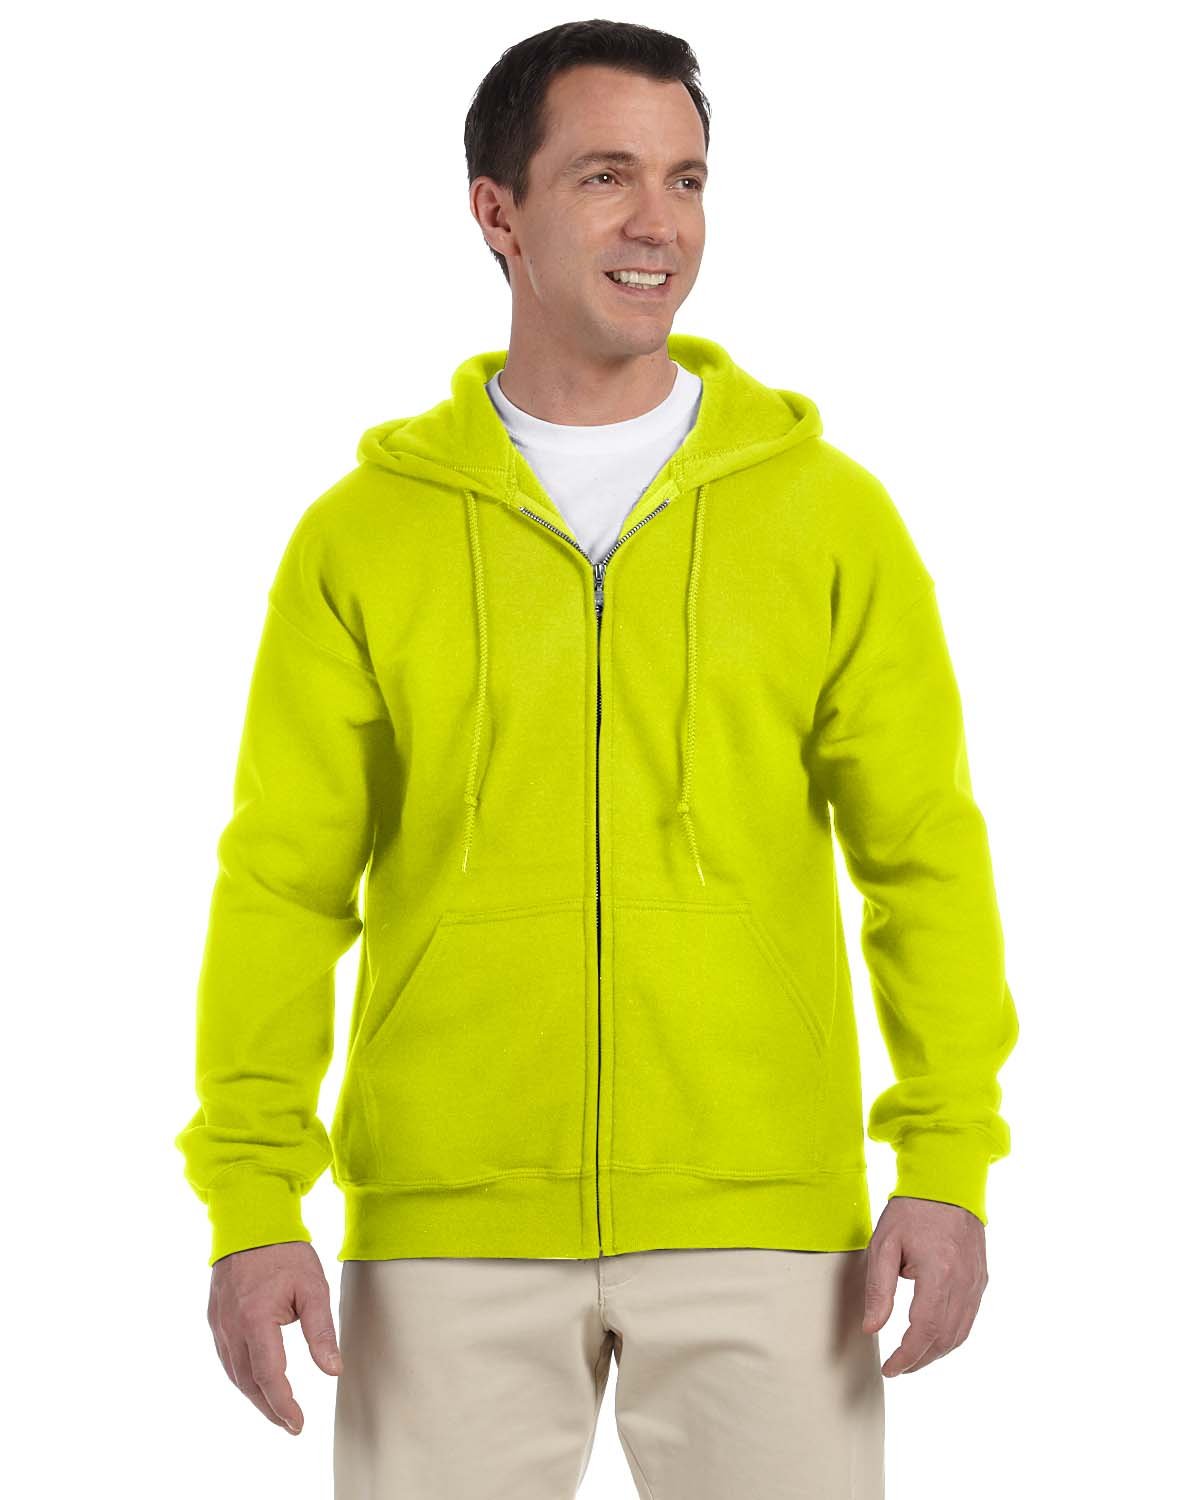 stay-cozy-and-fashionable-with-the-gildan-adult-dryblend-50-50-full-zip-hooded-sweatshirt